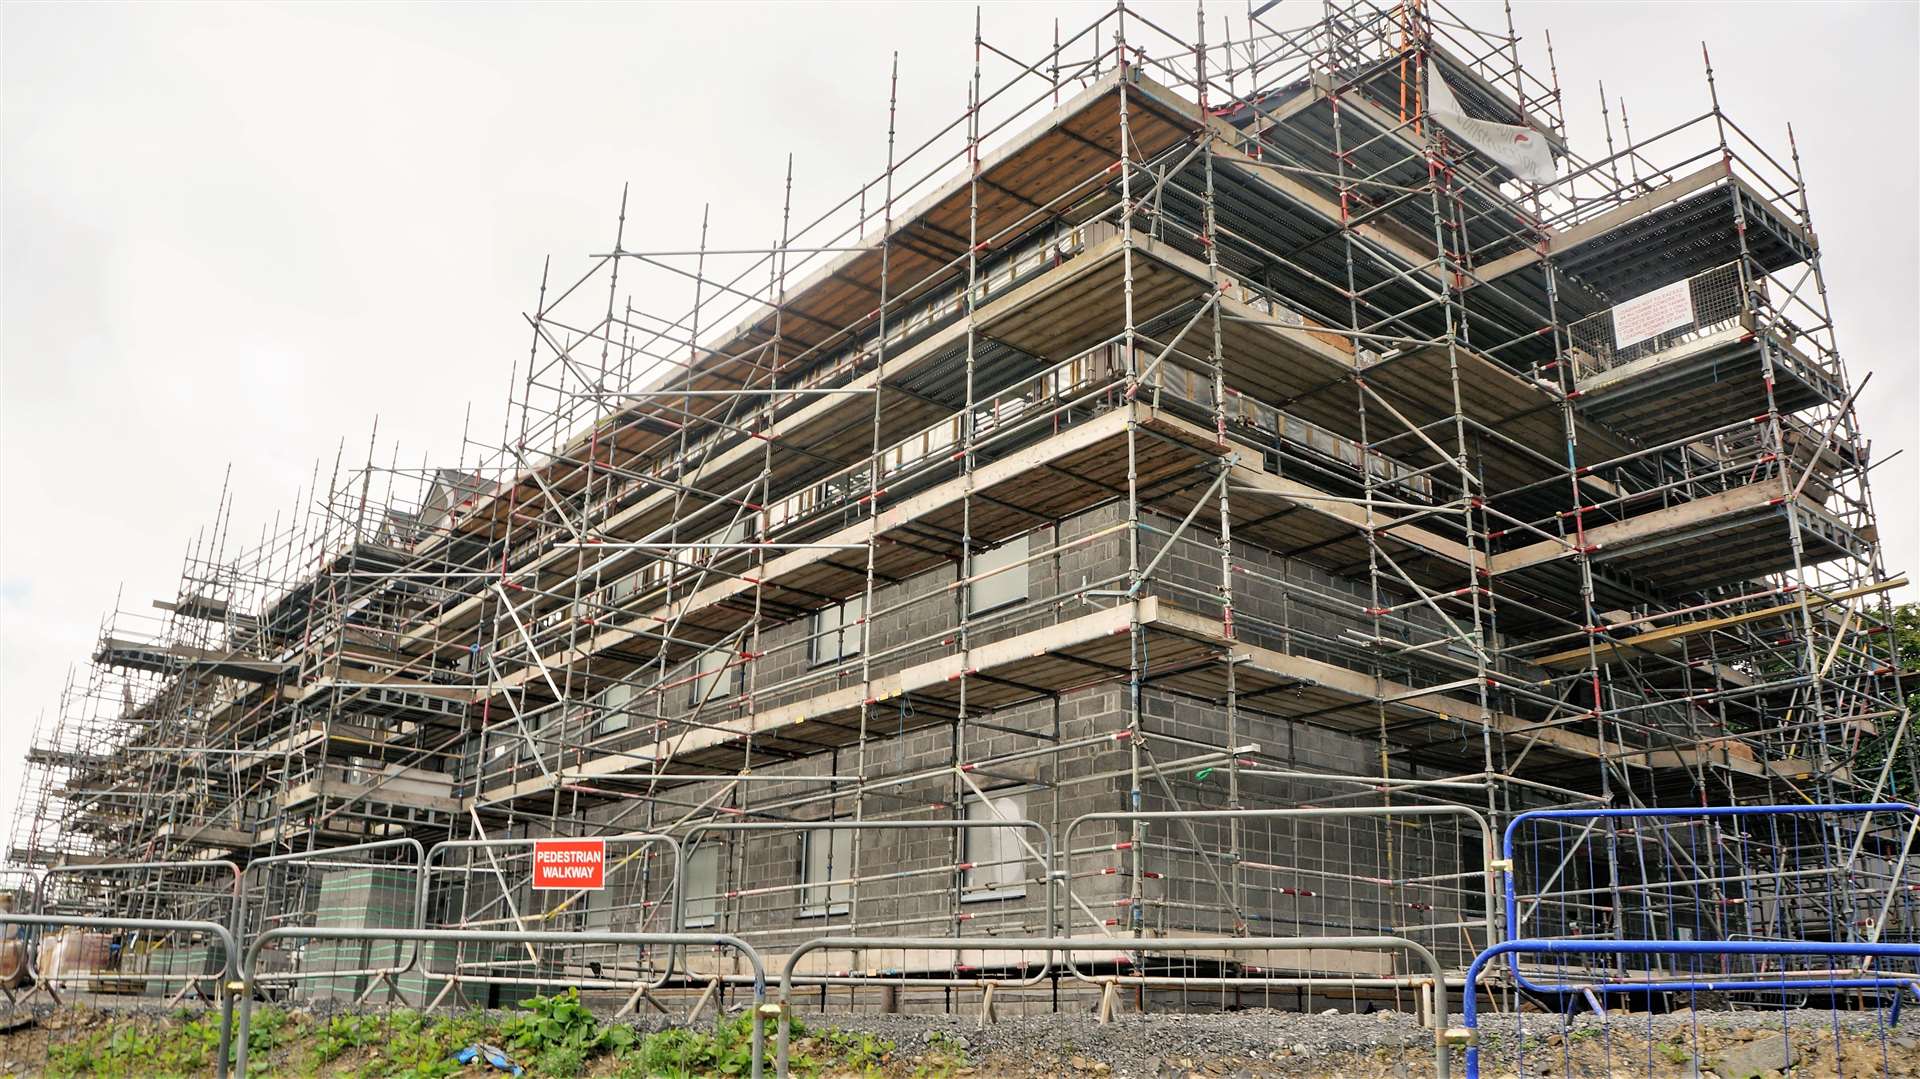 The Premier Inn development in Thurso where tools were recently snatched from. Picture: DGS